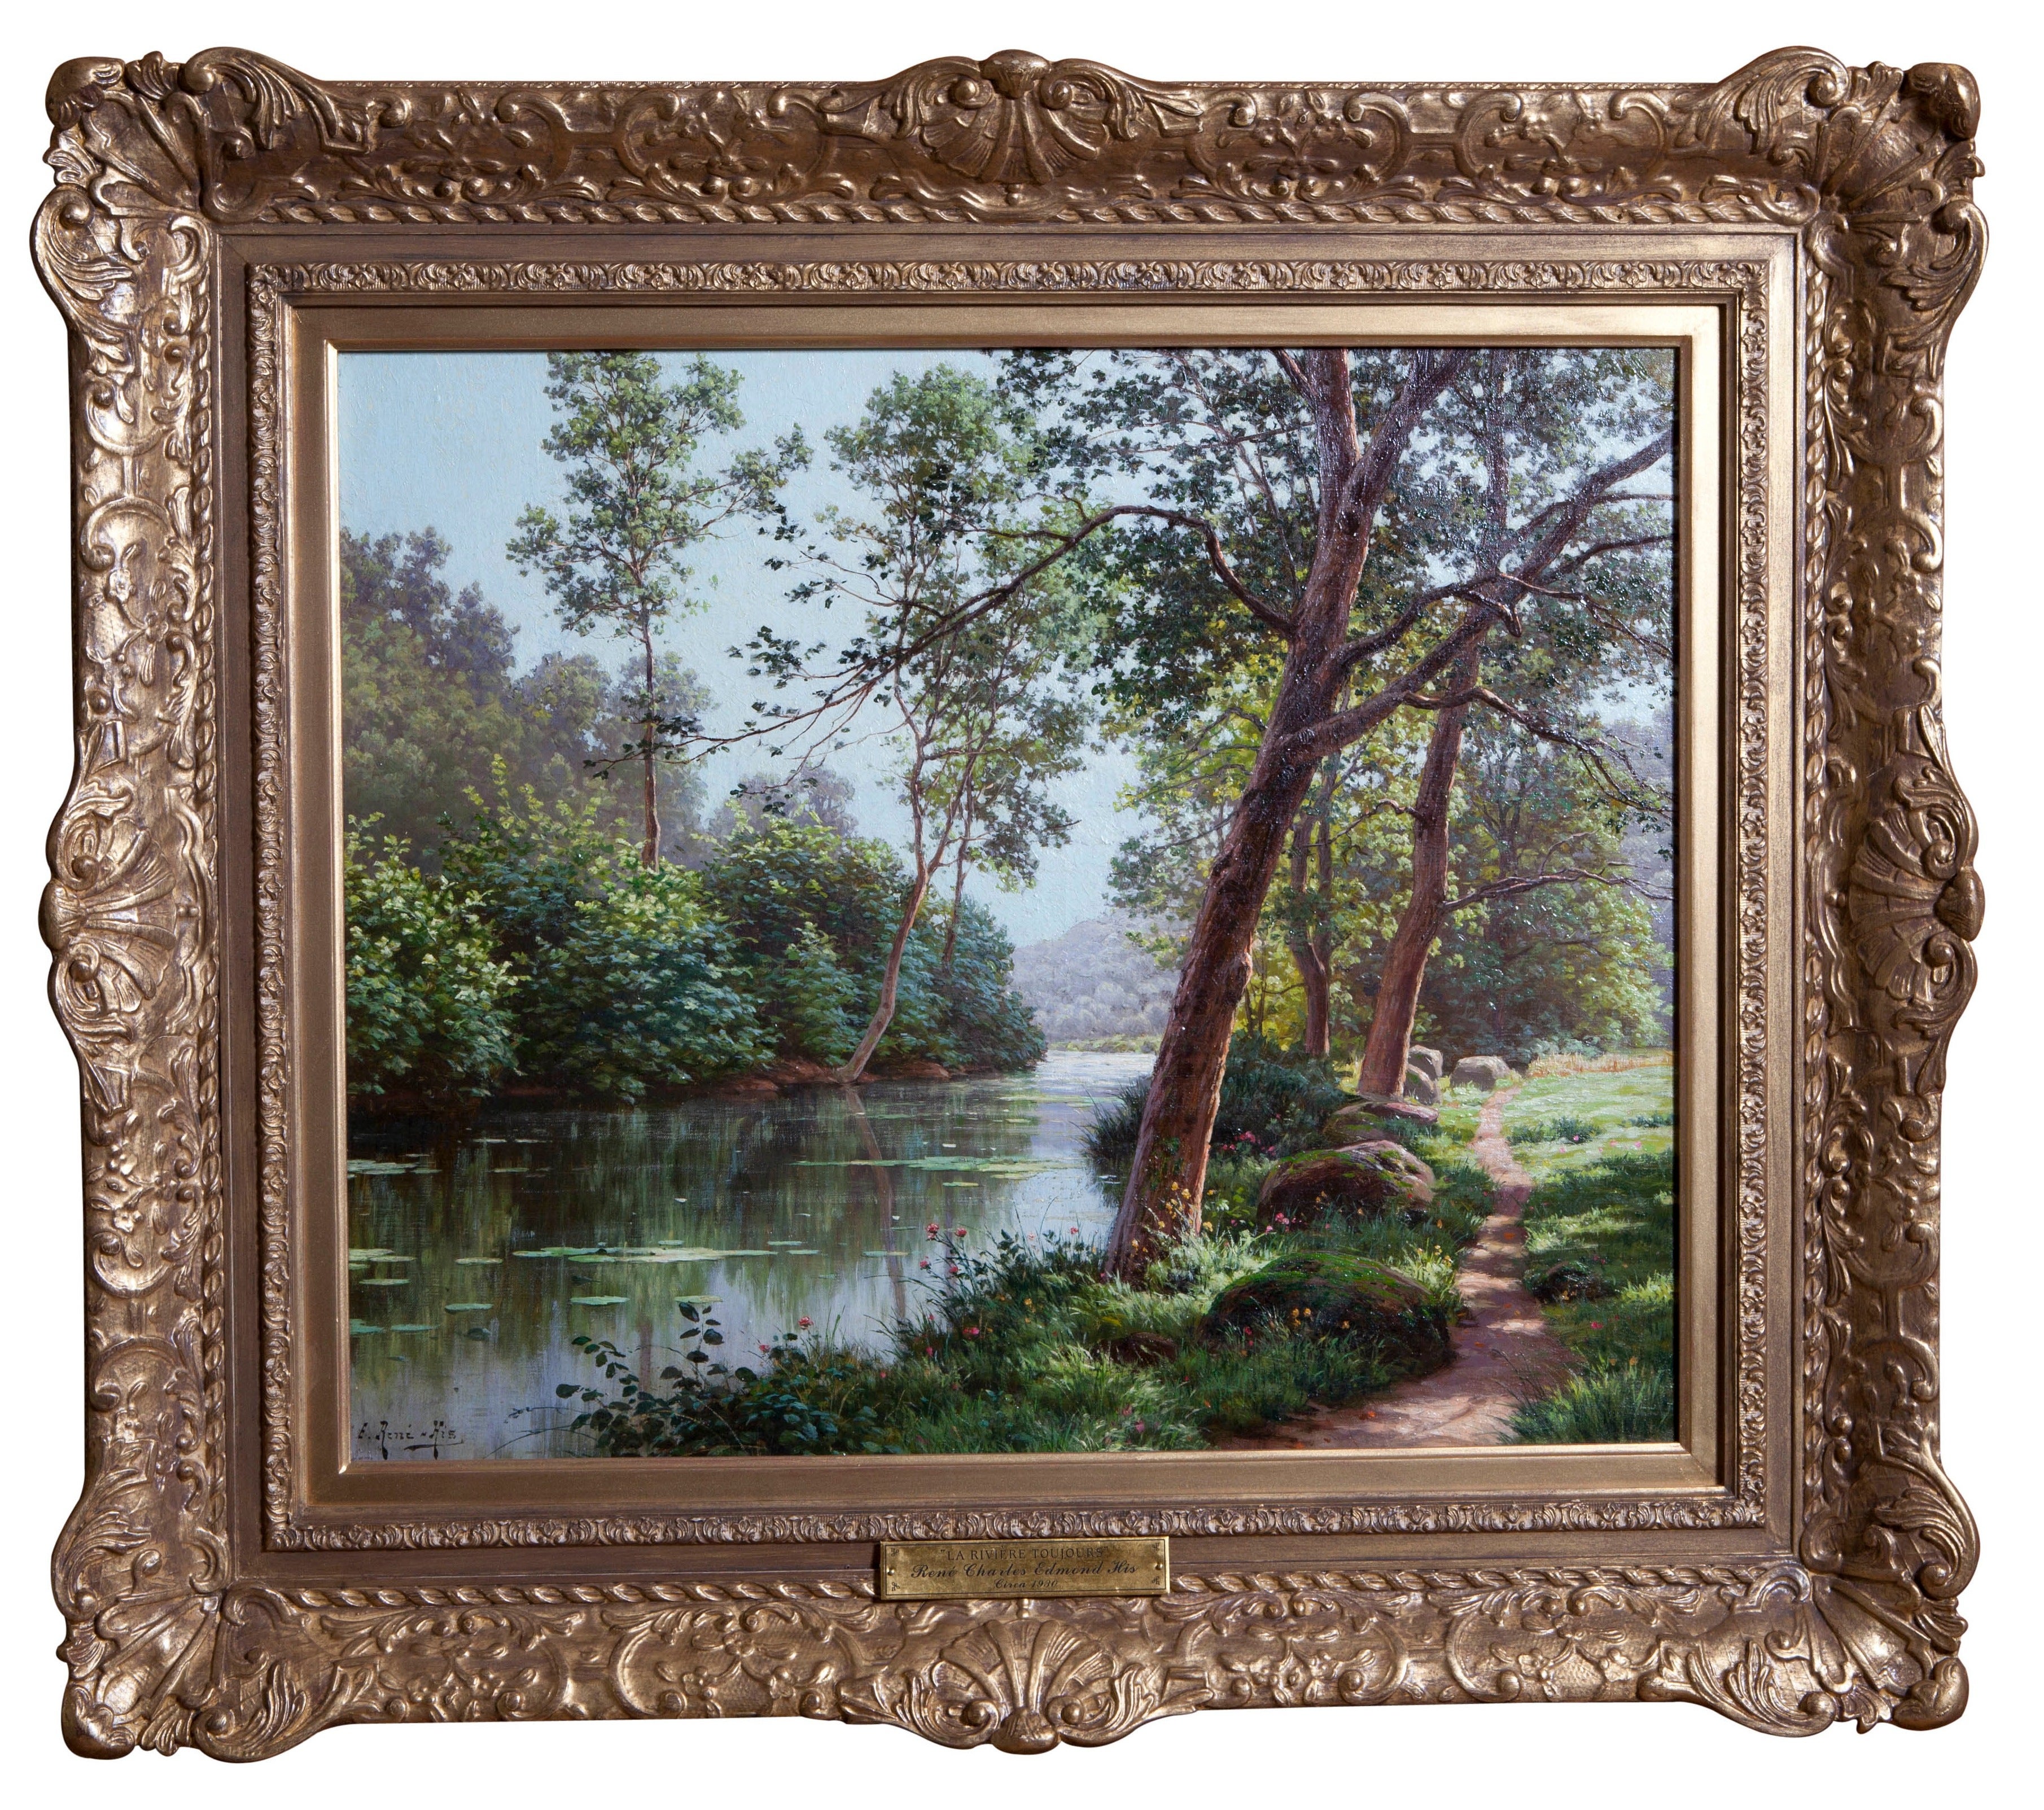 "The River in Summer" by Charles Edmond Rene His